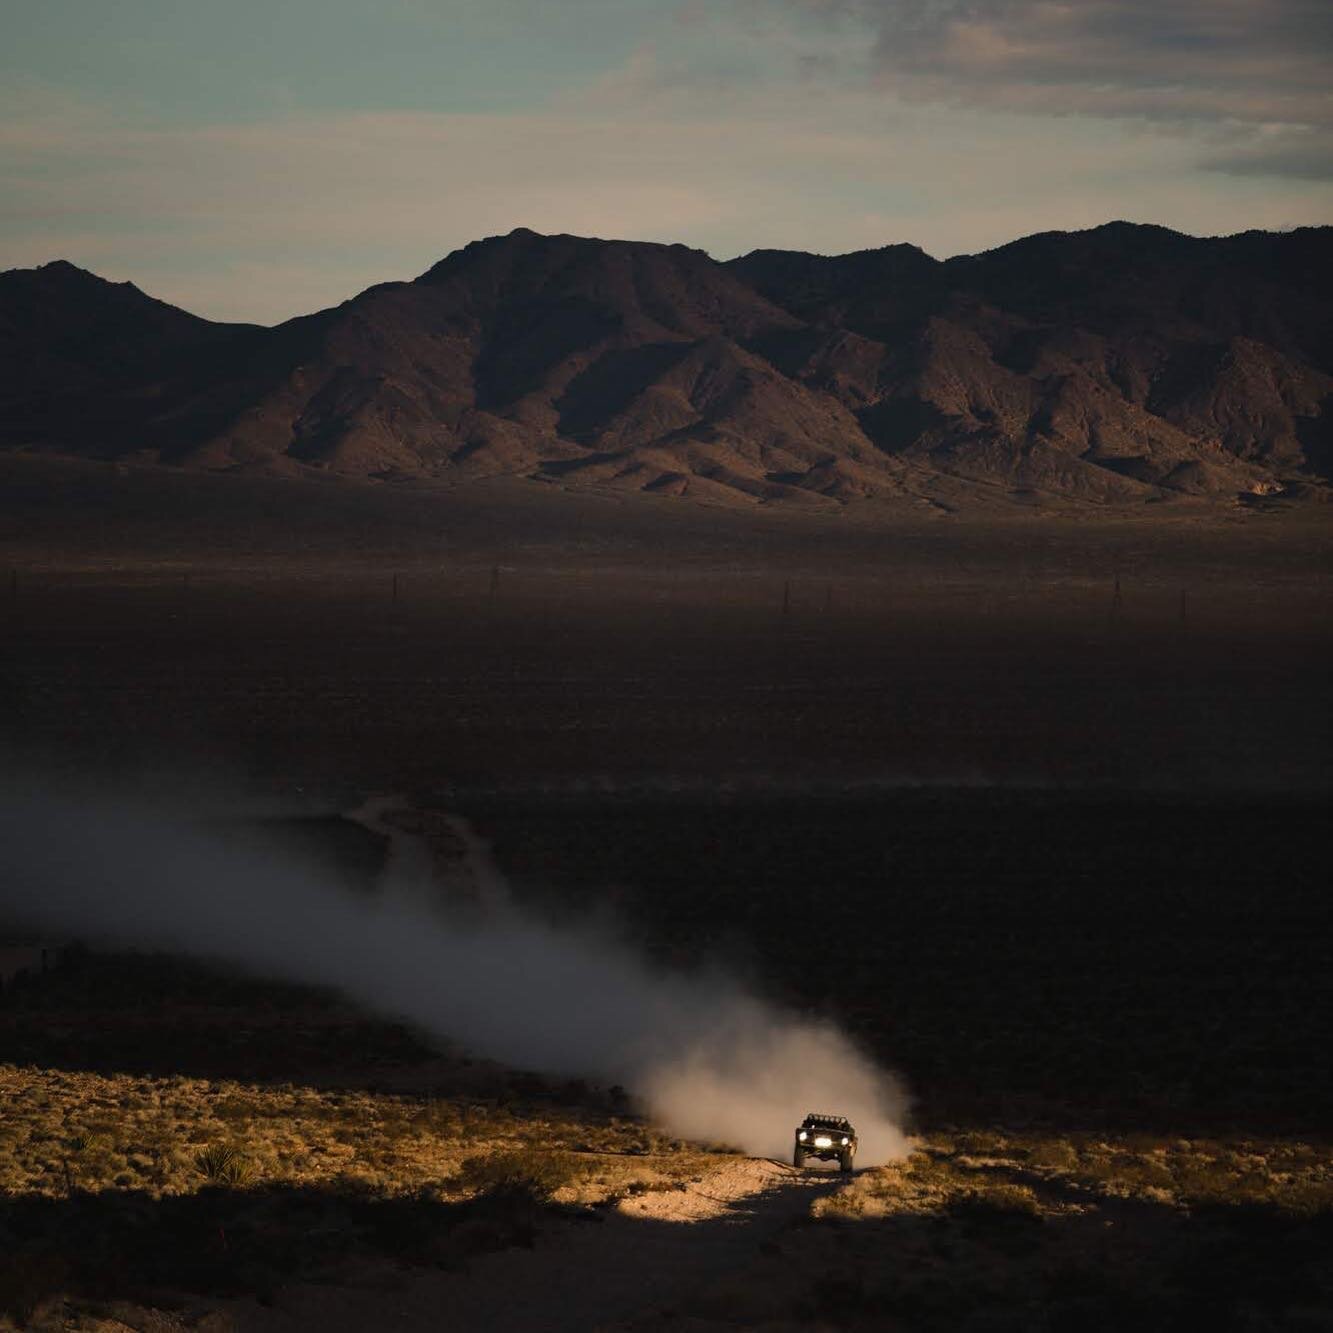 Mint 400 is next week. Needless to say we are pumped to go shoot it and tell awesome stories. 

This is a photo of @chris_isenhouer ripping up the main straight up to Pit B, a breathtaking sight as the aun sets on the valley. 

#mint400